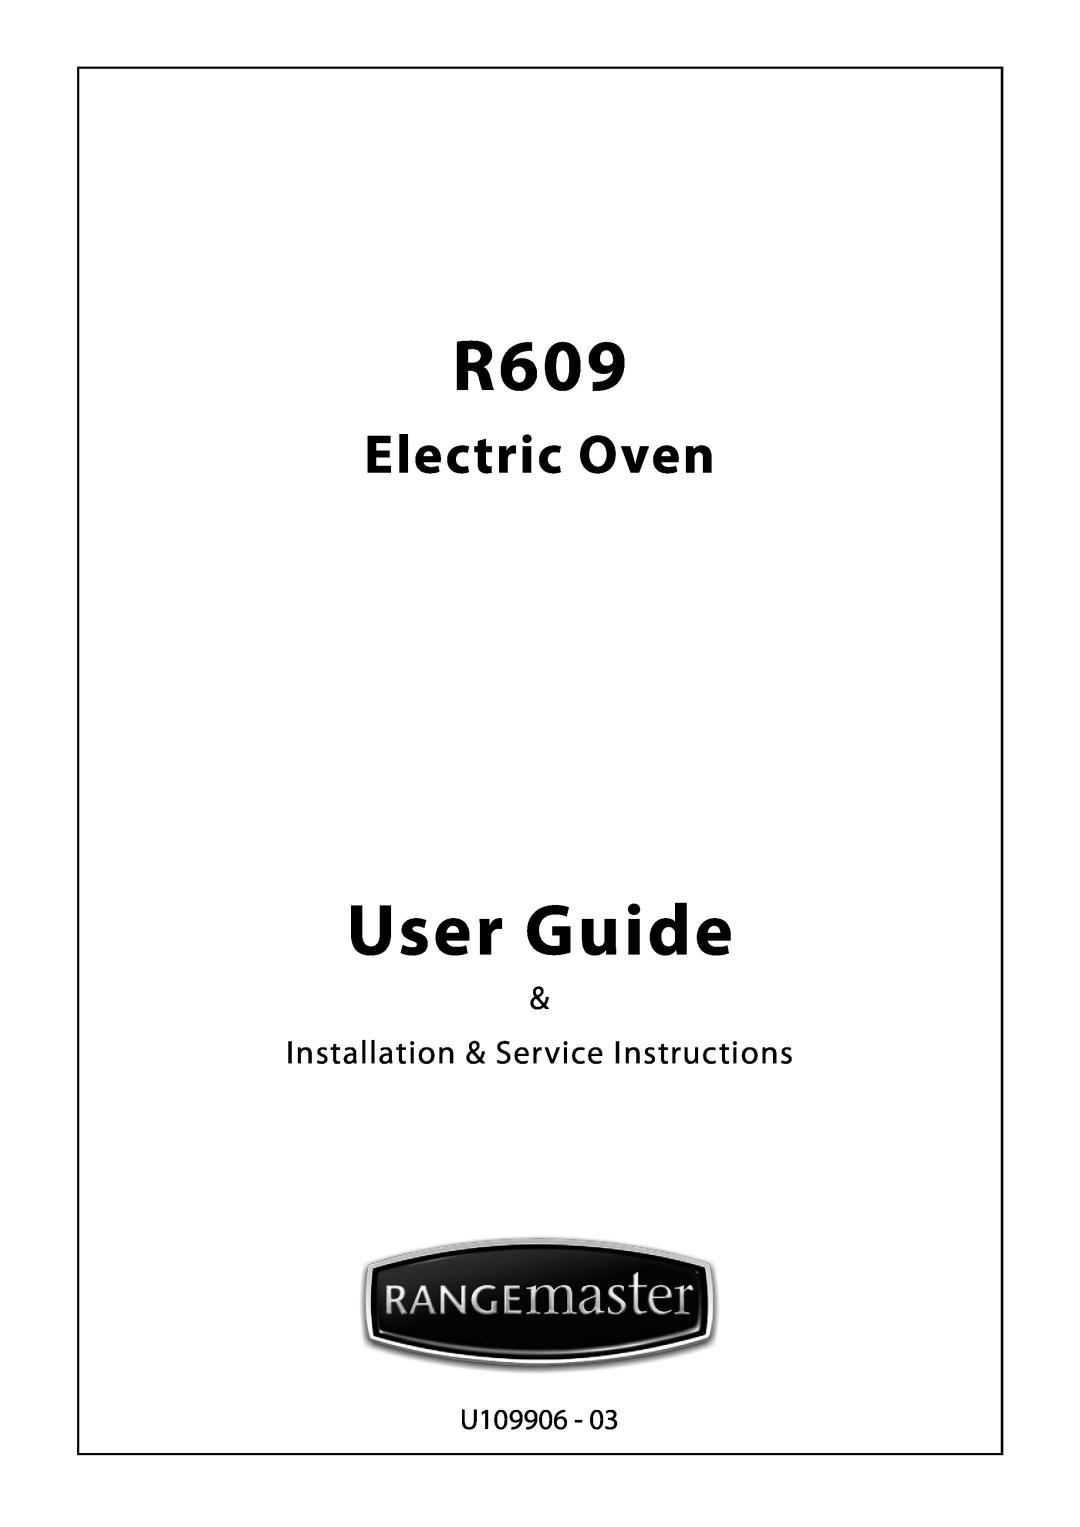 Rangemaster R609 manual User Guide, Electric Oven, Installation & Service Instructions, U109906 